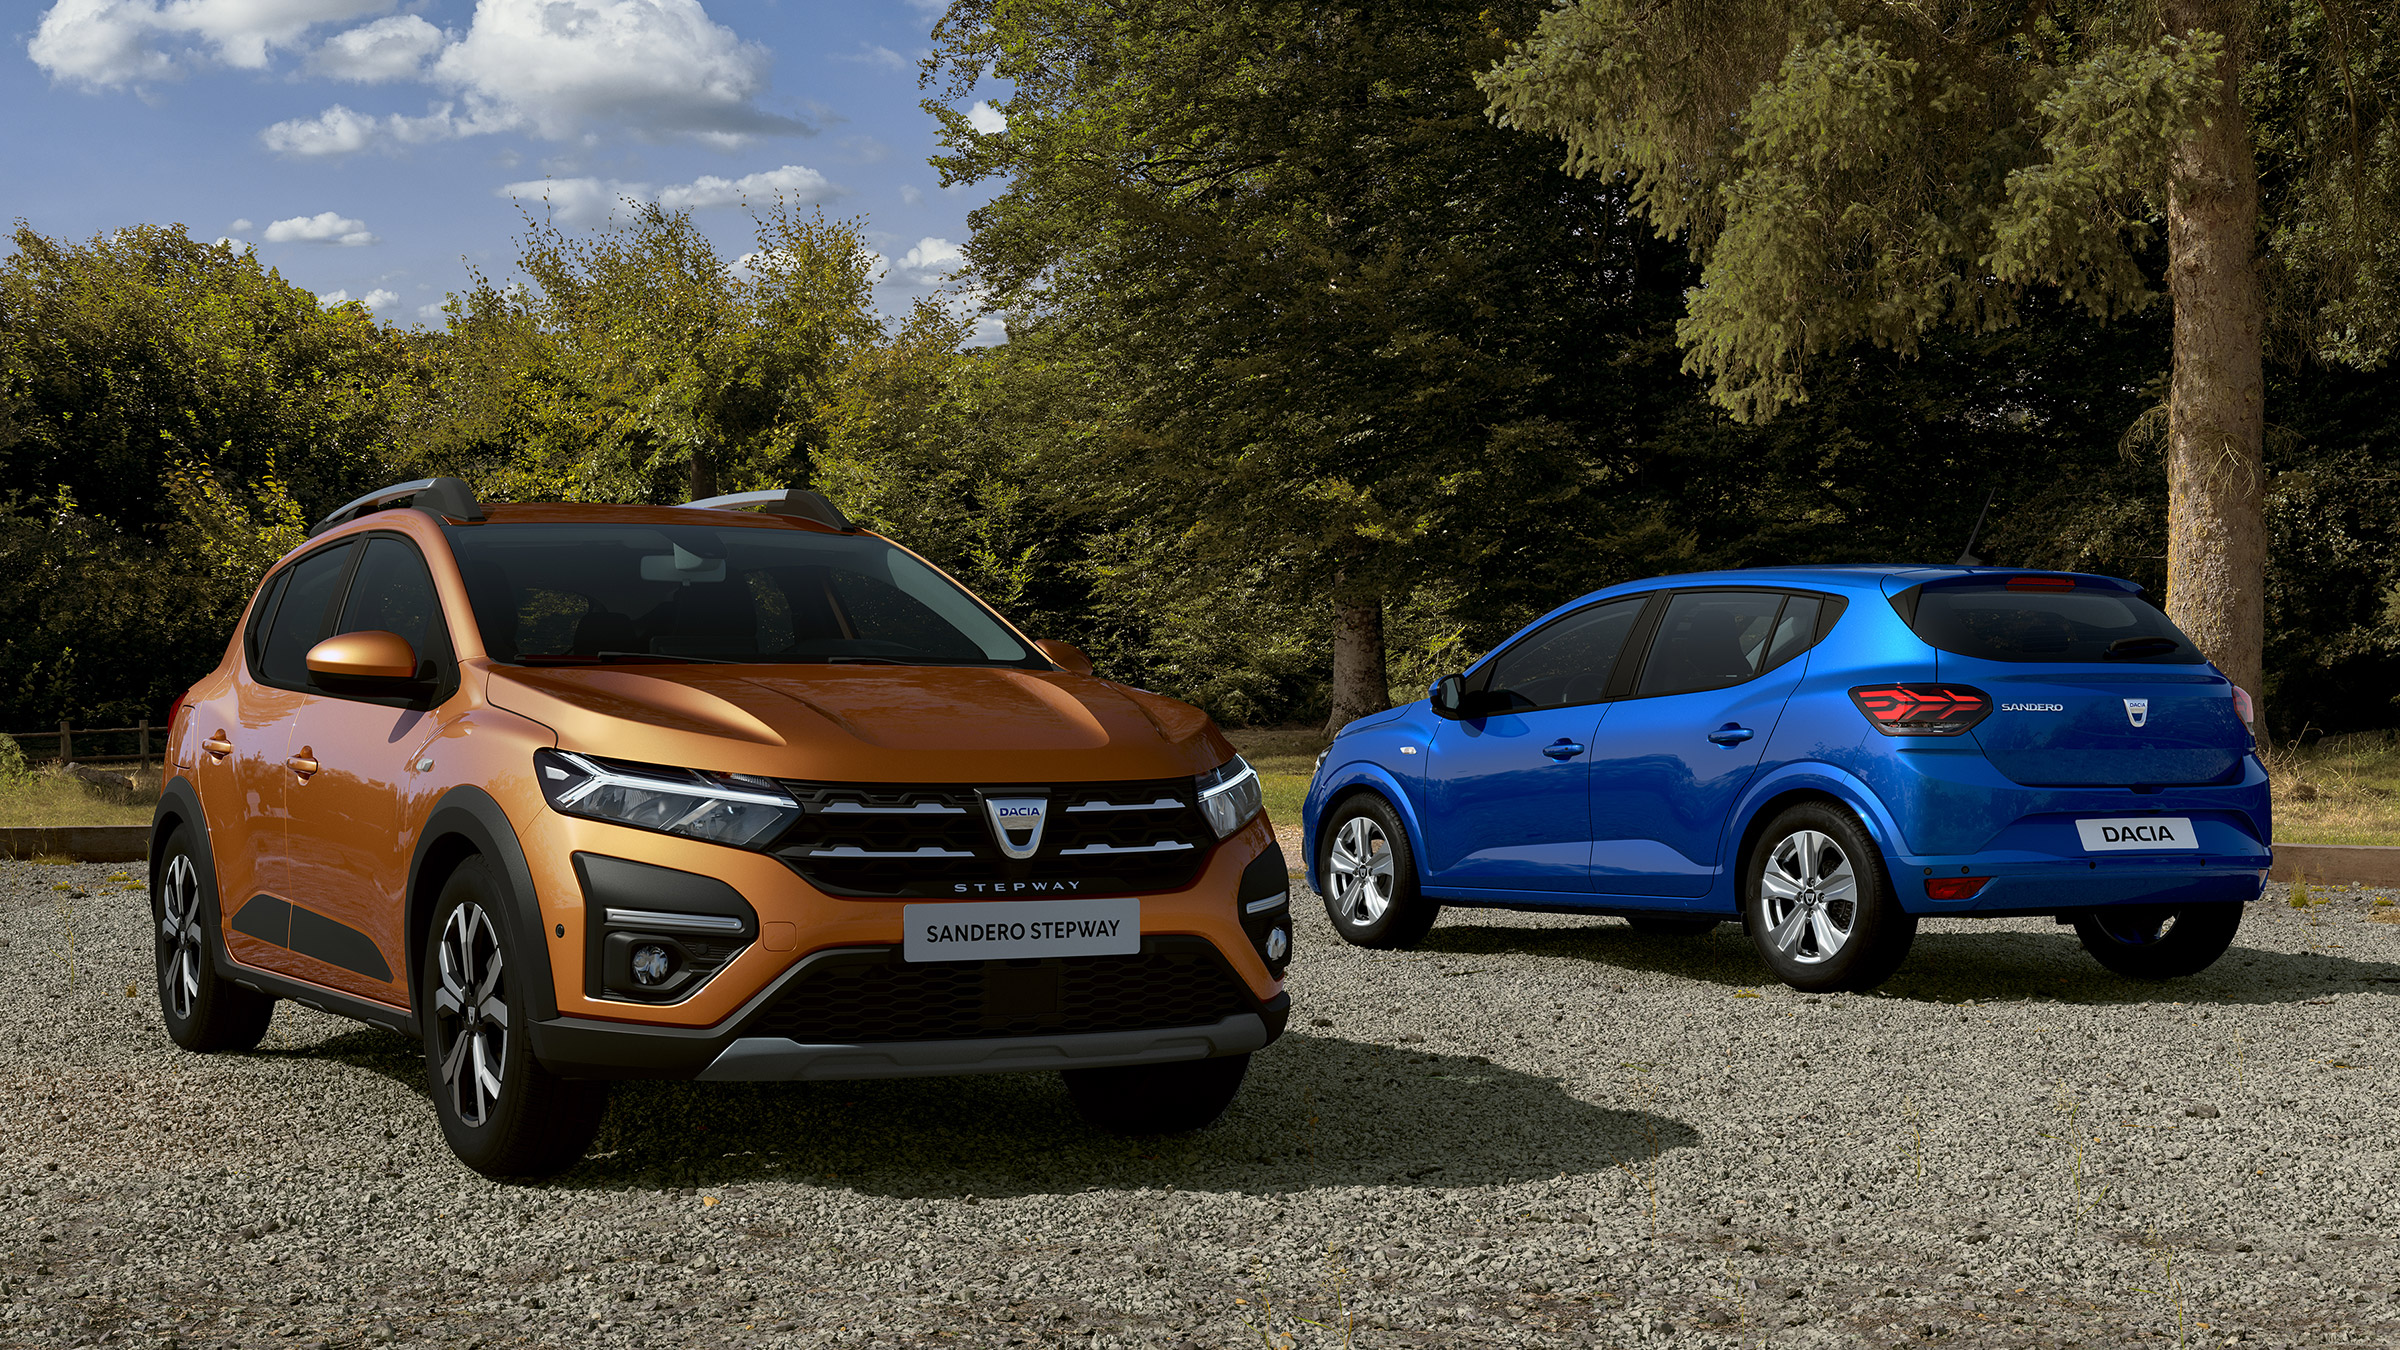 New 2021 Dacia Sandero revealed in official images  Auto 